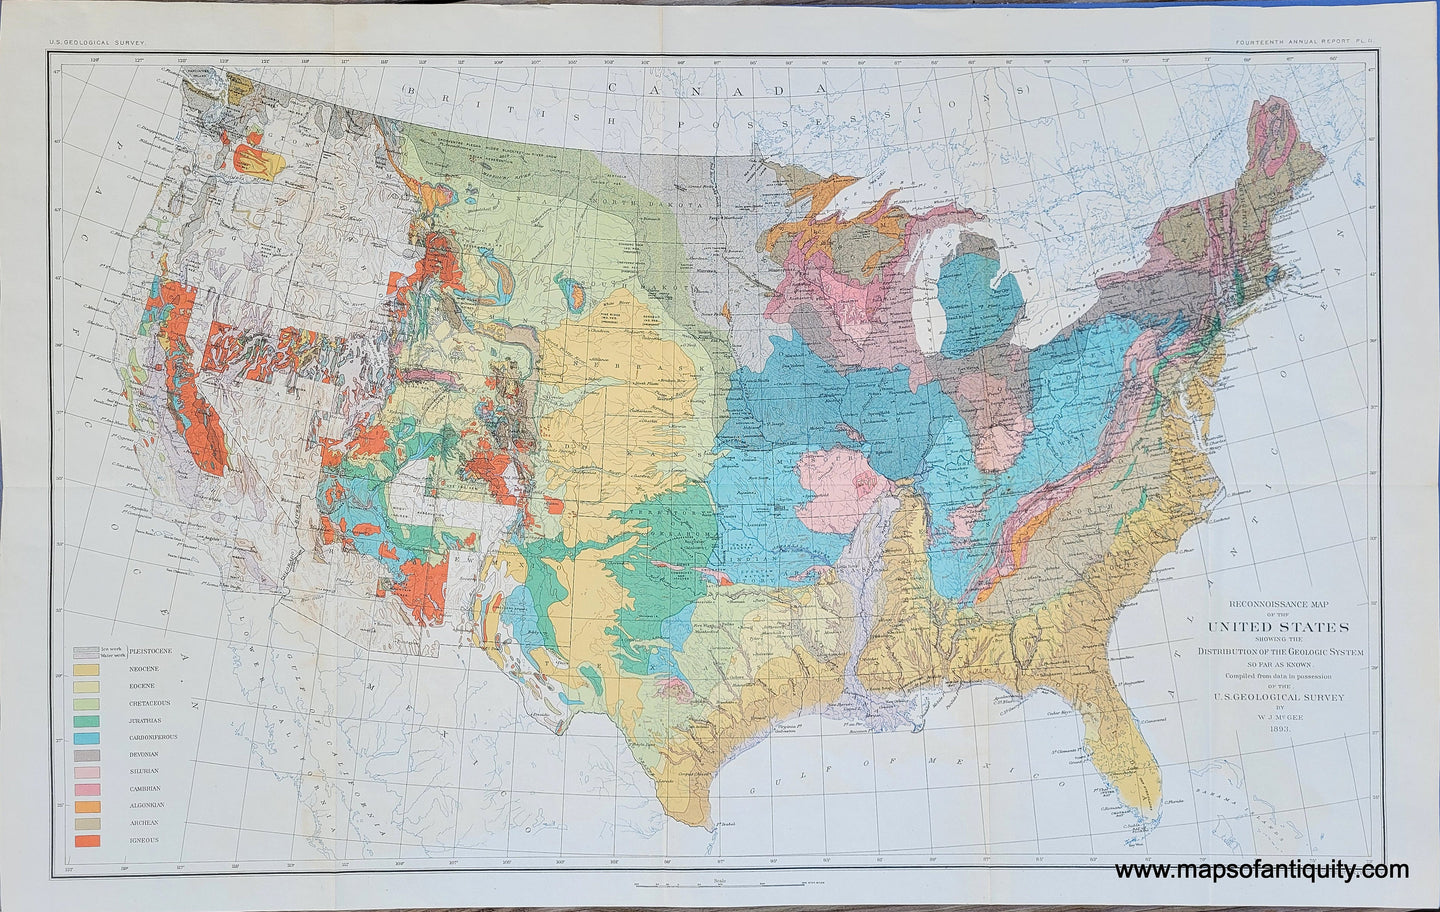 Genuine-Antique-Map-Reconnoissance-Map-of-the-United-States-showing-the-Distribution-of-the-Geologic-System-so-far-as-known--1893-USGS-/-McGee-Maps-Of-Antiquity